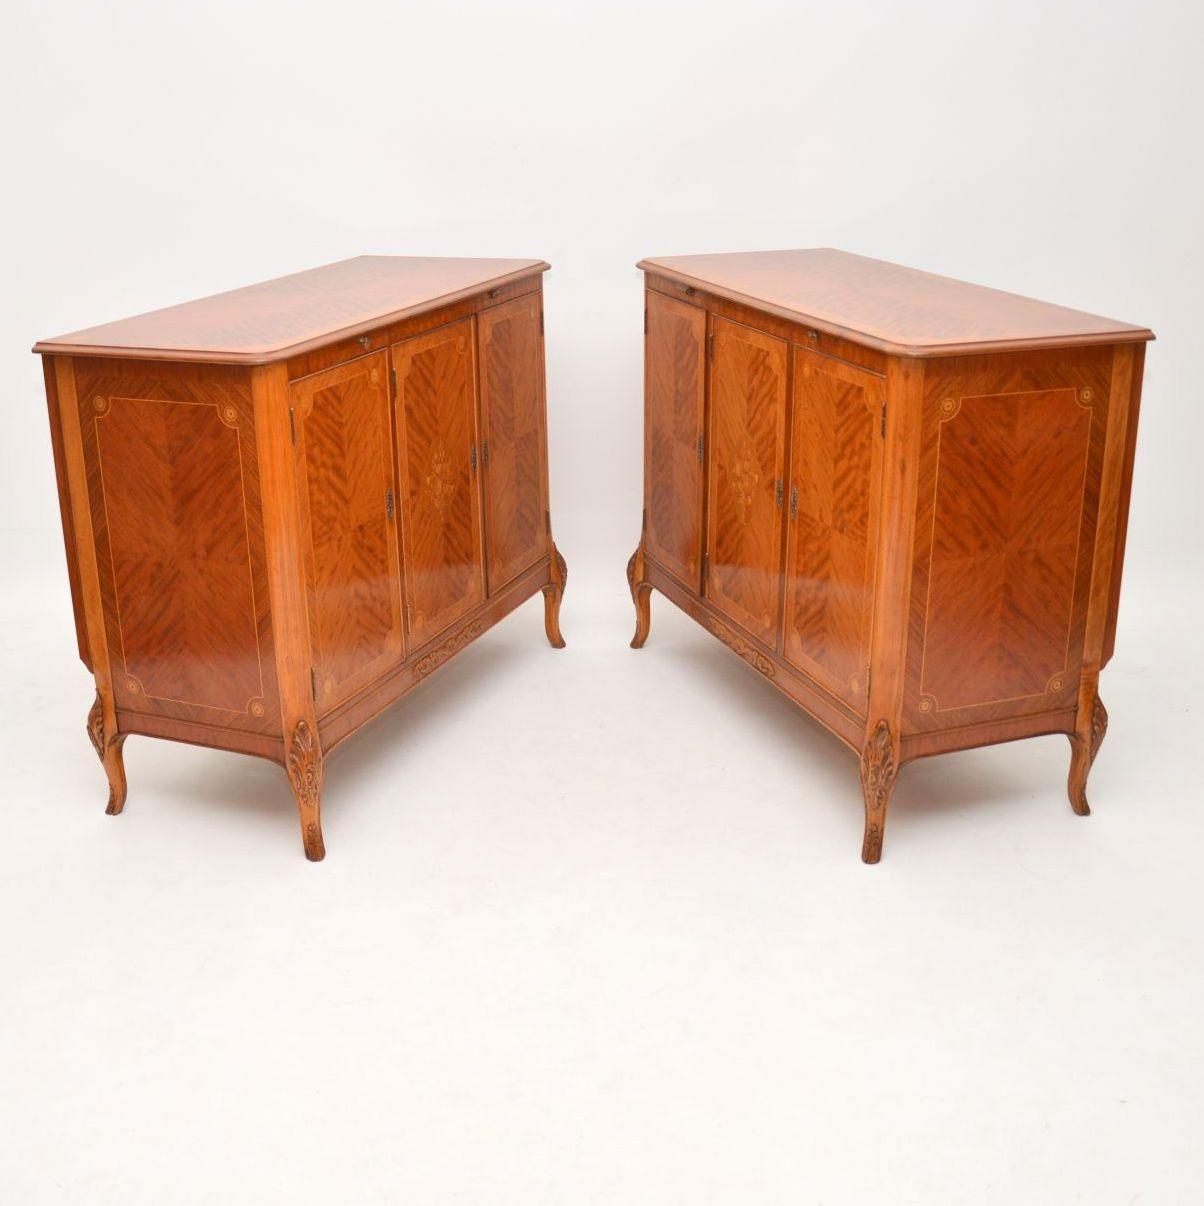 20th Century Pair of Antique French Style Inlaid King Wood Cabinets